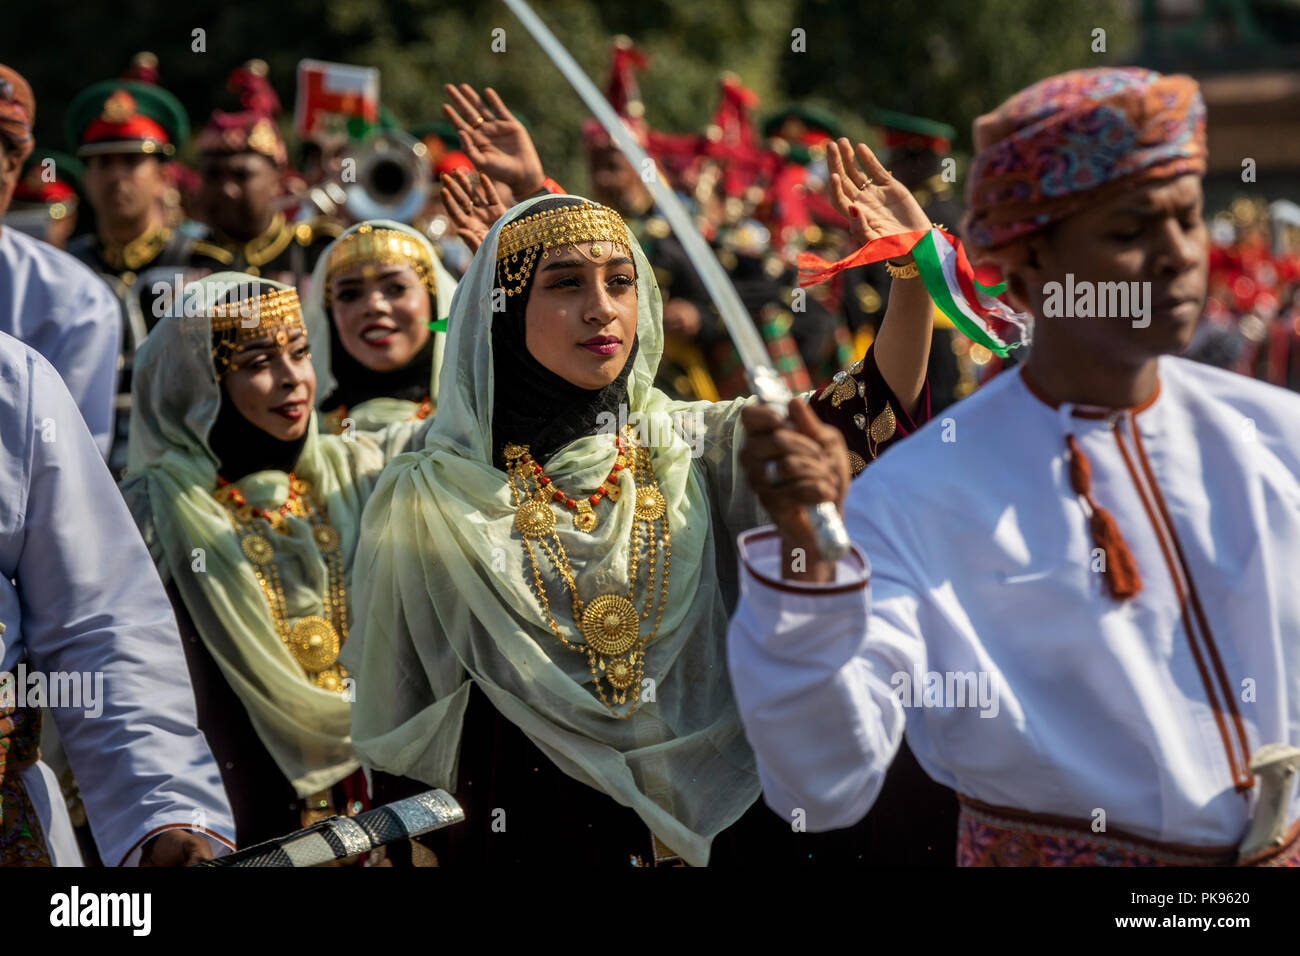 Traditional Bedouin dance at the wedding during a performance of the military band of the Royal Guard of Oman country in Moscow Stock Photo